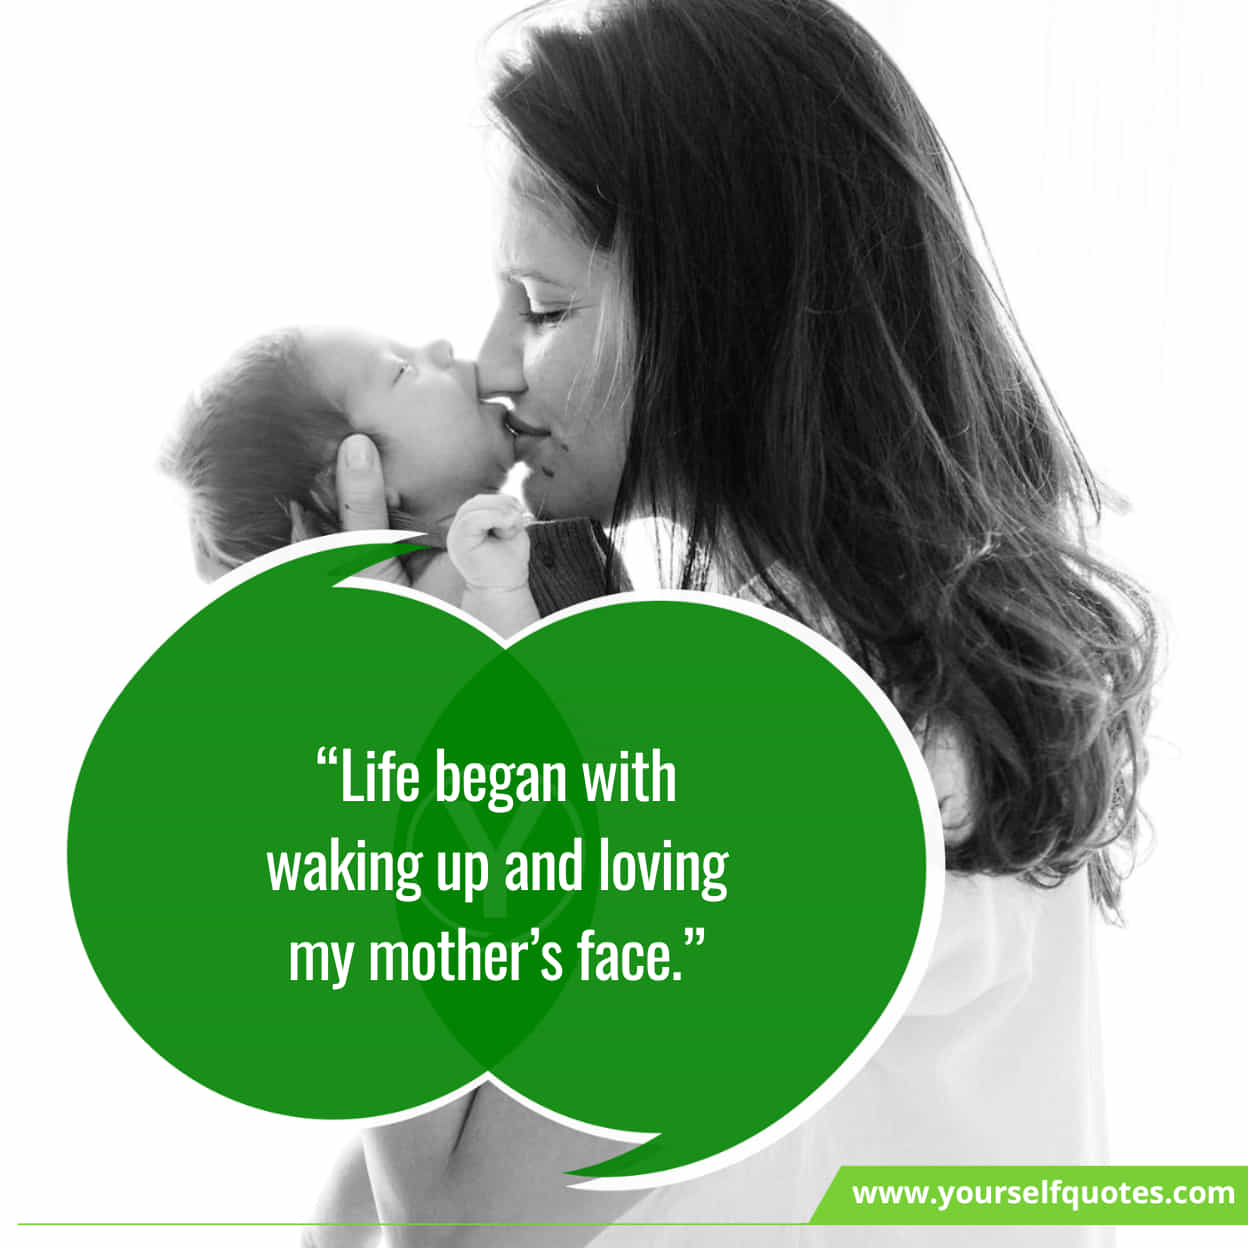 Best Happy Mothers Day Quotes